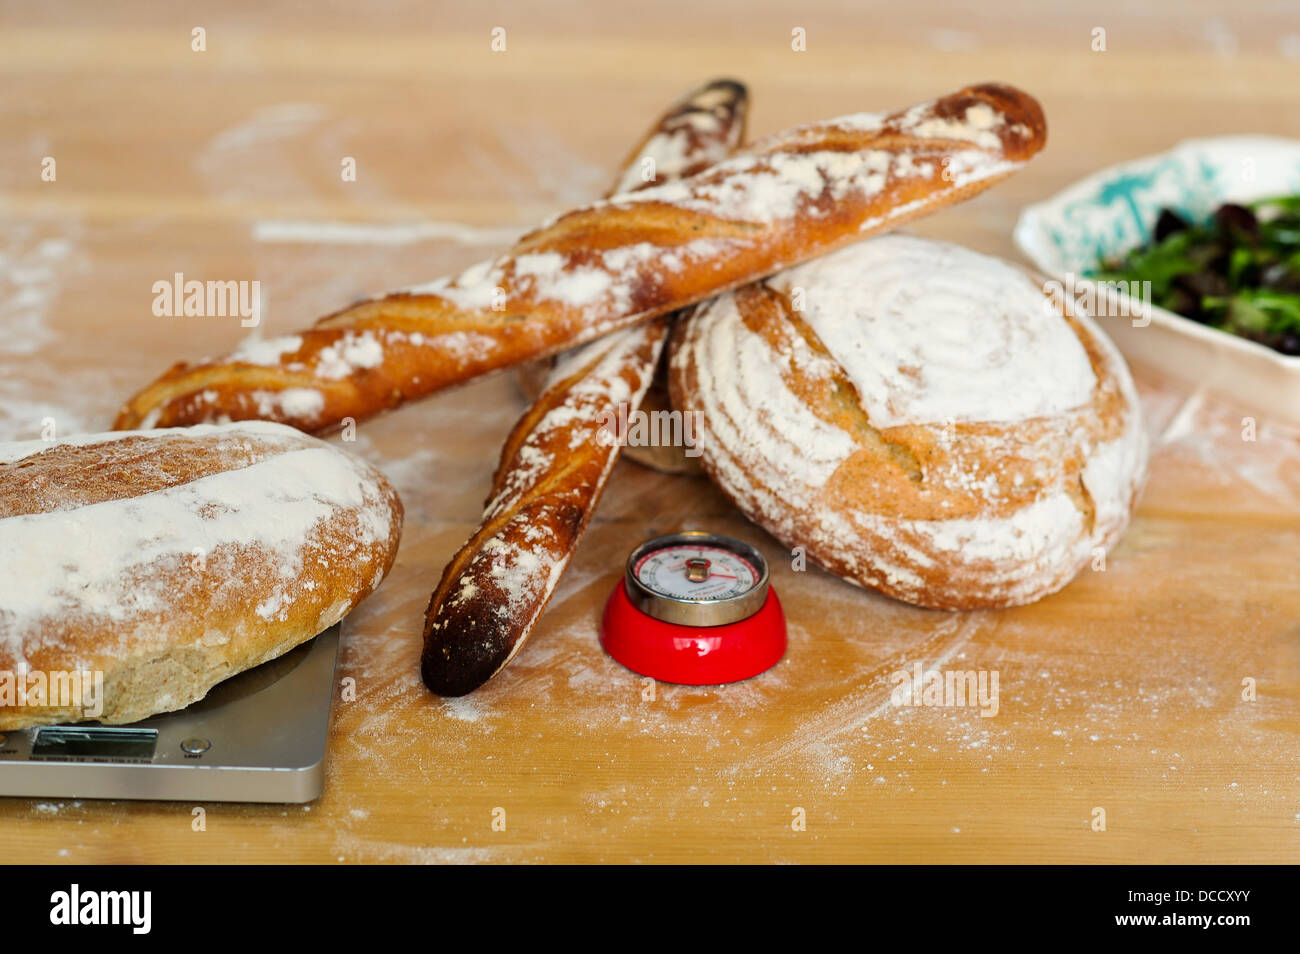 Baguettes and breads on wooden table. Closeup shot Stock Photo